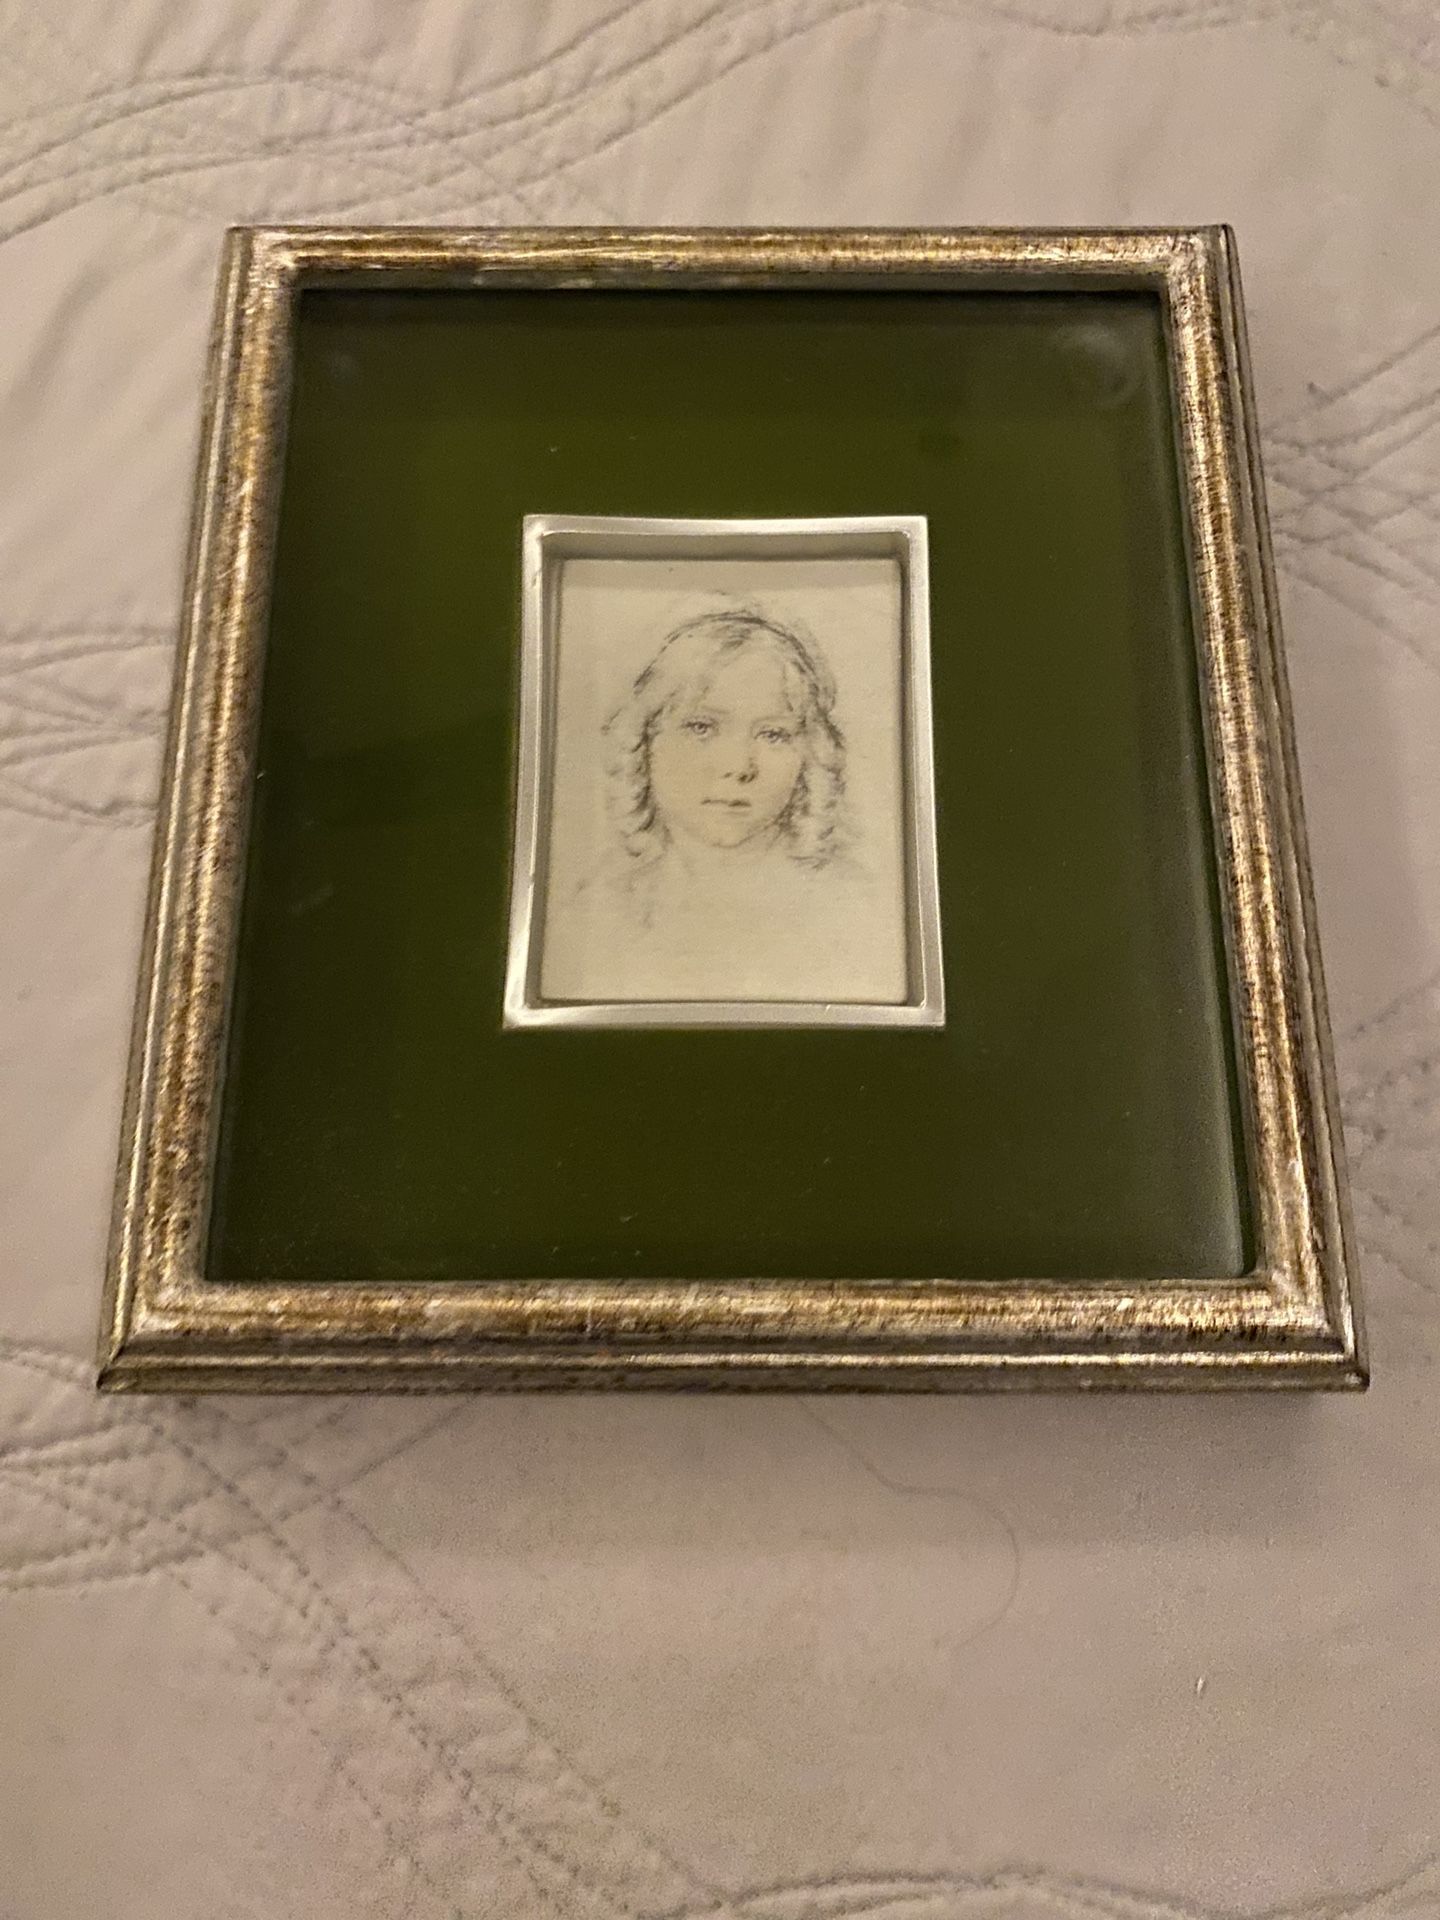 Framed Pencil Sketch of Young Girl on Silk